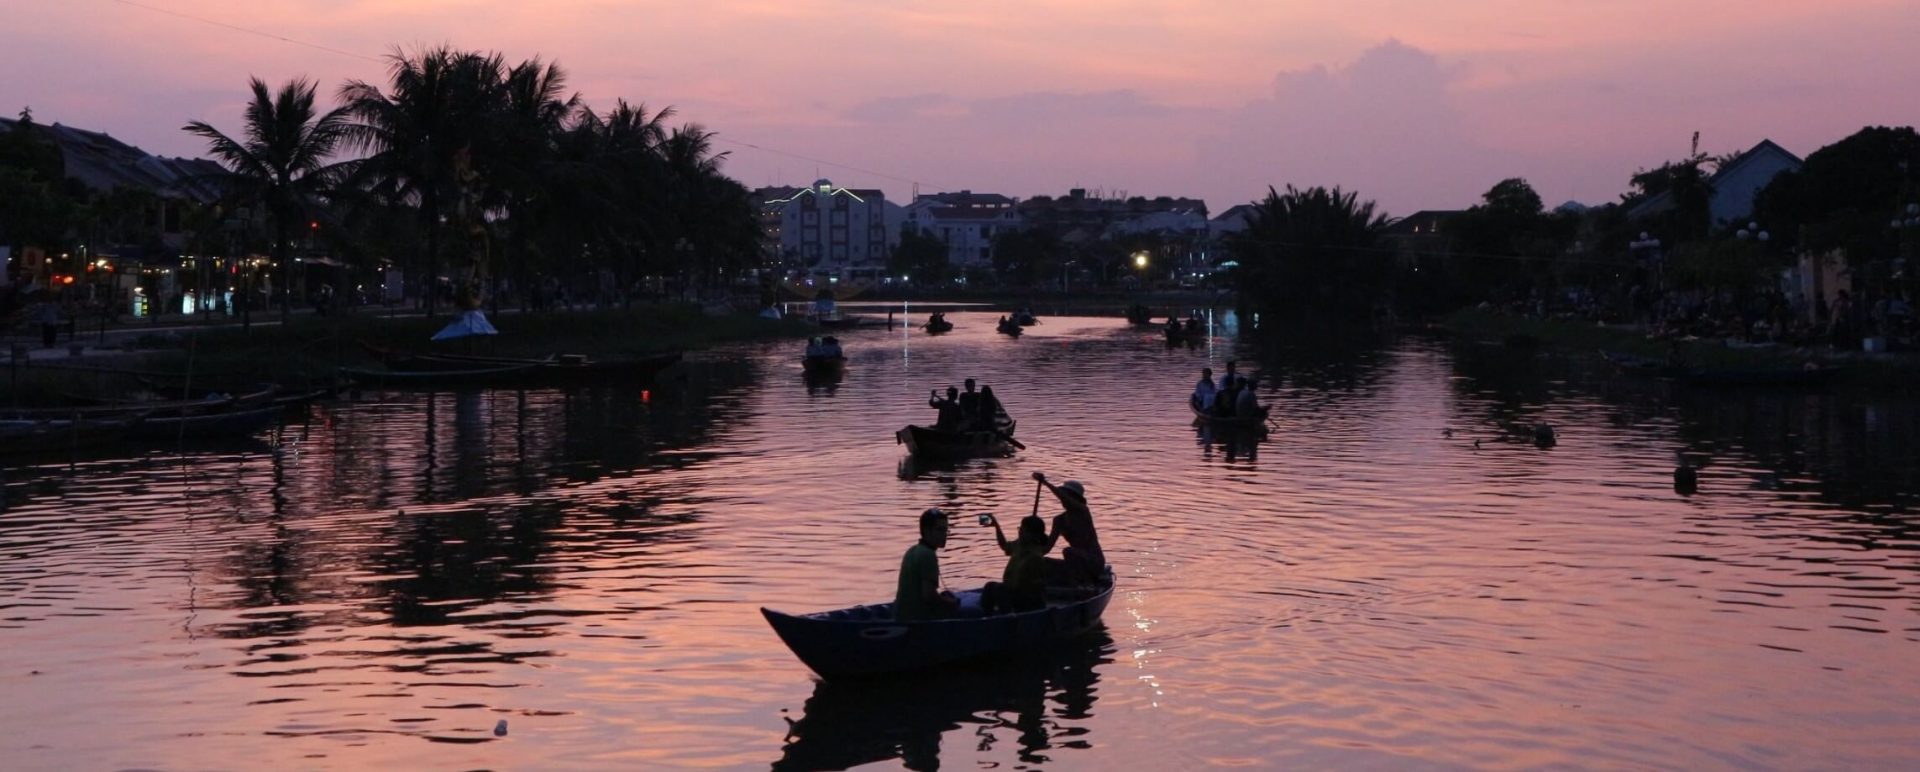 The river of Hoi An ancient town in the afternoon